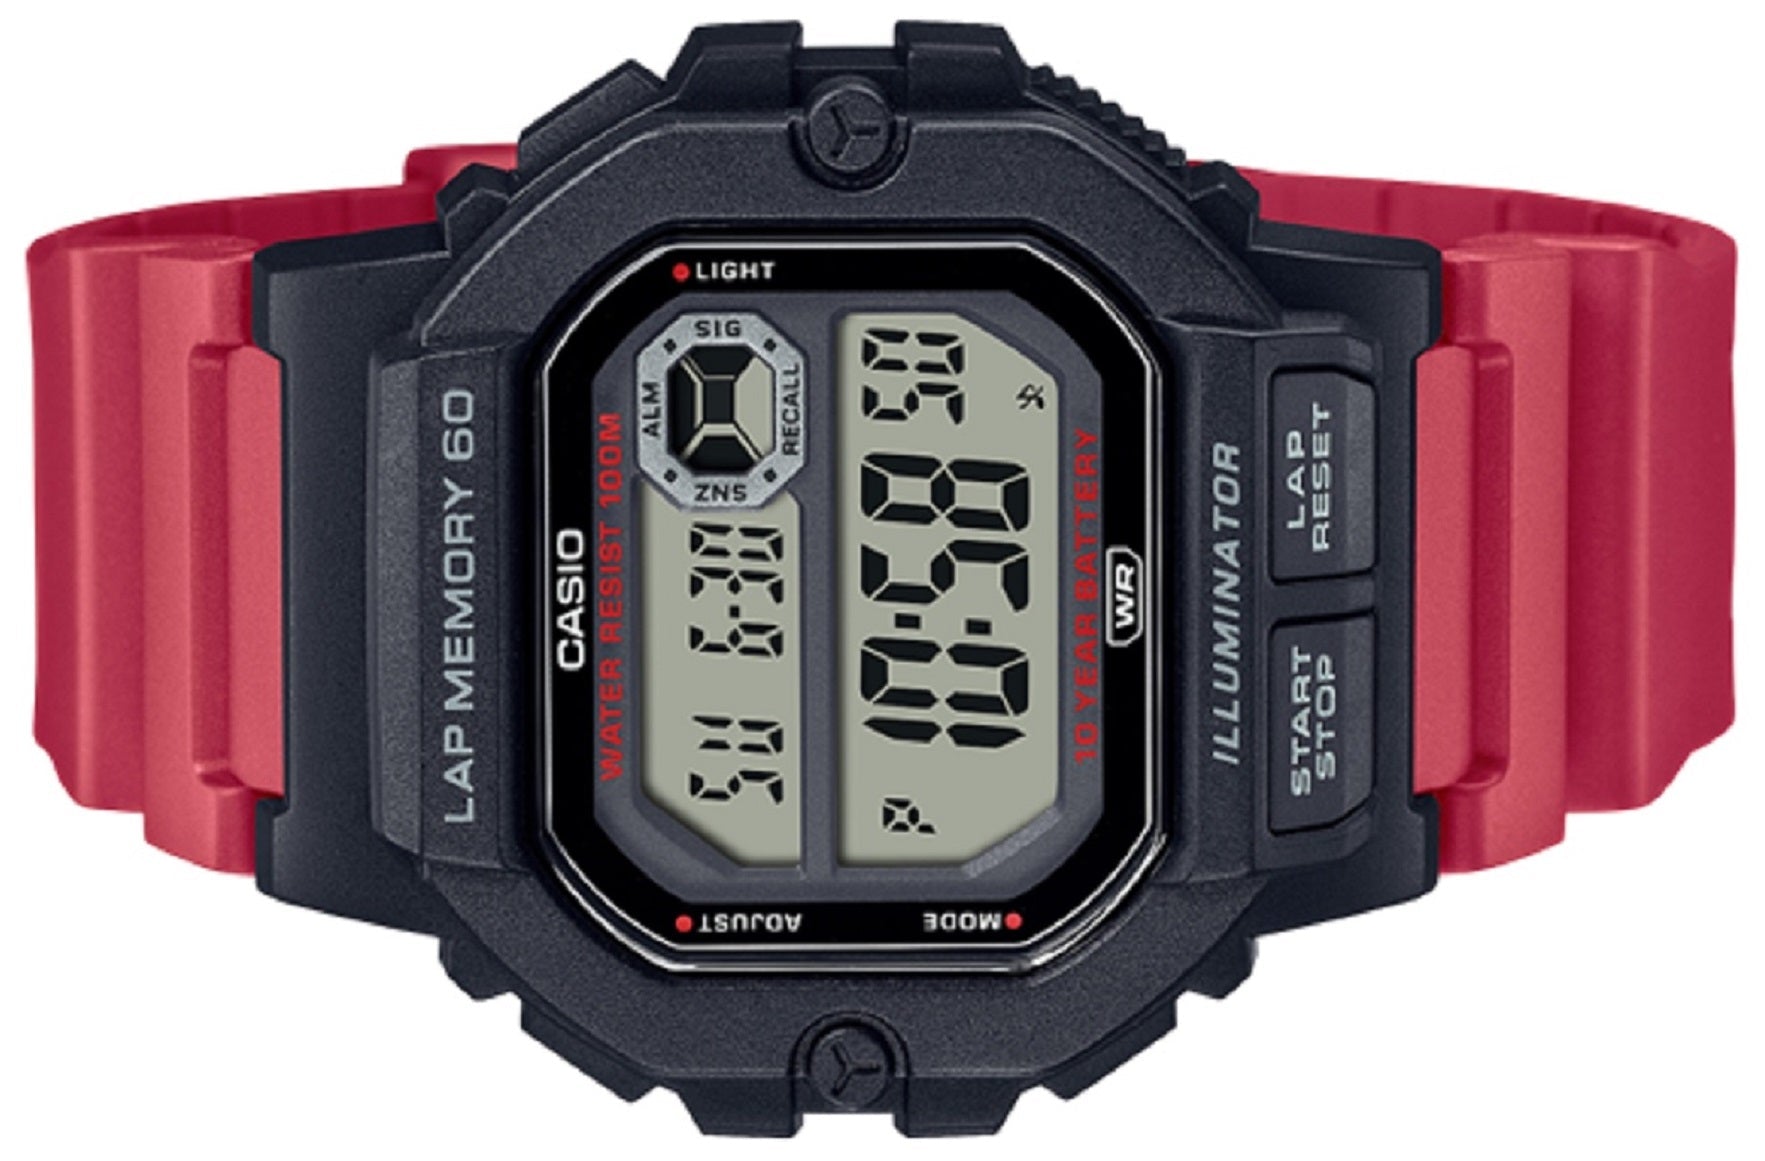 Casio WS-1400H-4A Red Resin Strap Watch for Men-Watch Portal Philippines